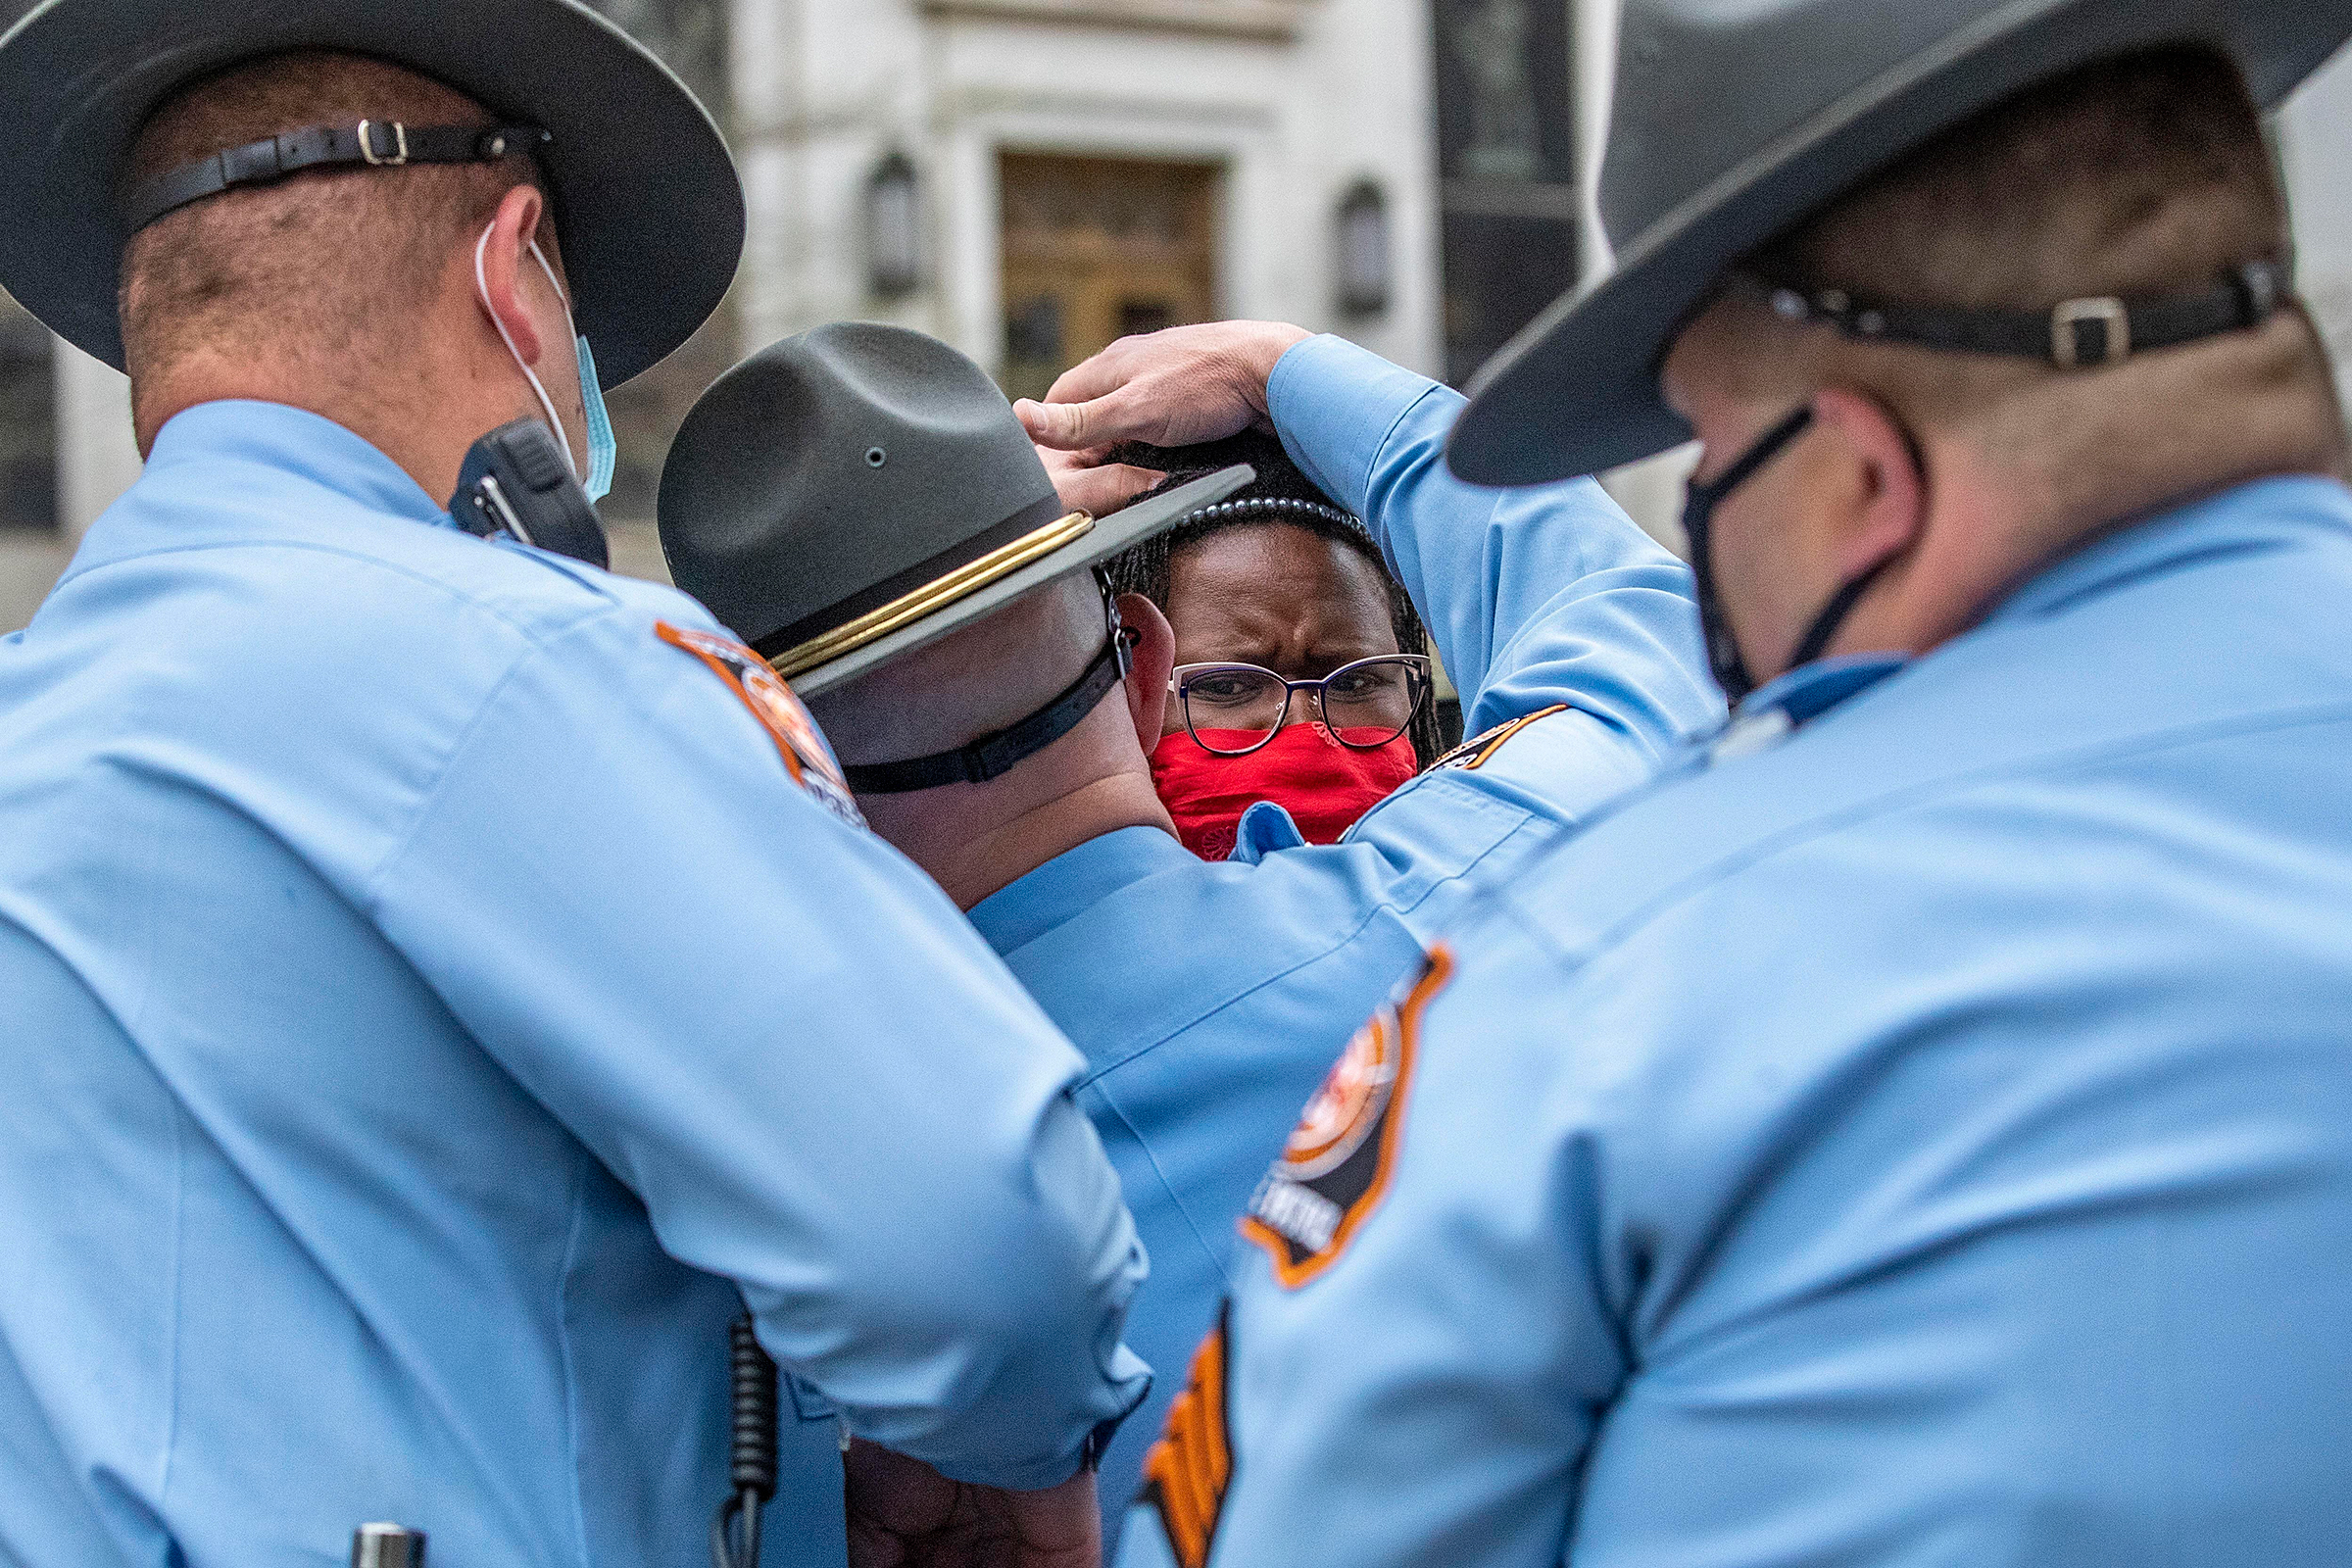 State Rep. Park Cannon, D-Atlanta, is placed into the back of a Georgia State Capitol patrol car after being arrested by Georgia State Troopers at the Georgia State Capitol Building in Atlanta on March 25, 2021. Cannon was arrested by Capitol police after she attempted to knock on the door of Gov. Brian Kemp's office during his remarks after he signed into law a sweeping Republican-sponsored overhaul of state elections. The Fulton County District attorney announced in April that Cannon would not be prosecuted.